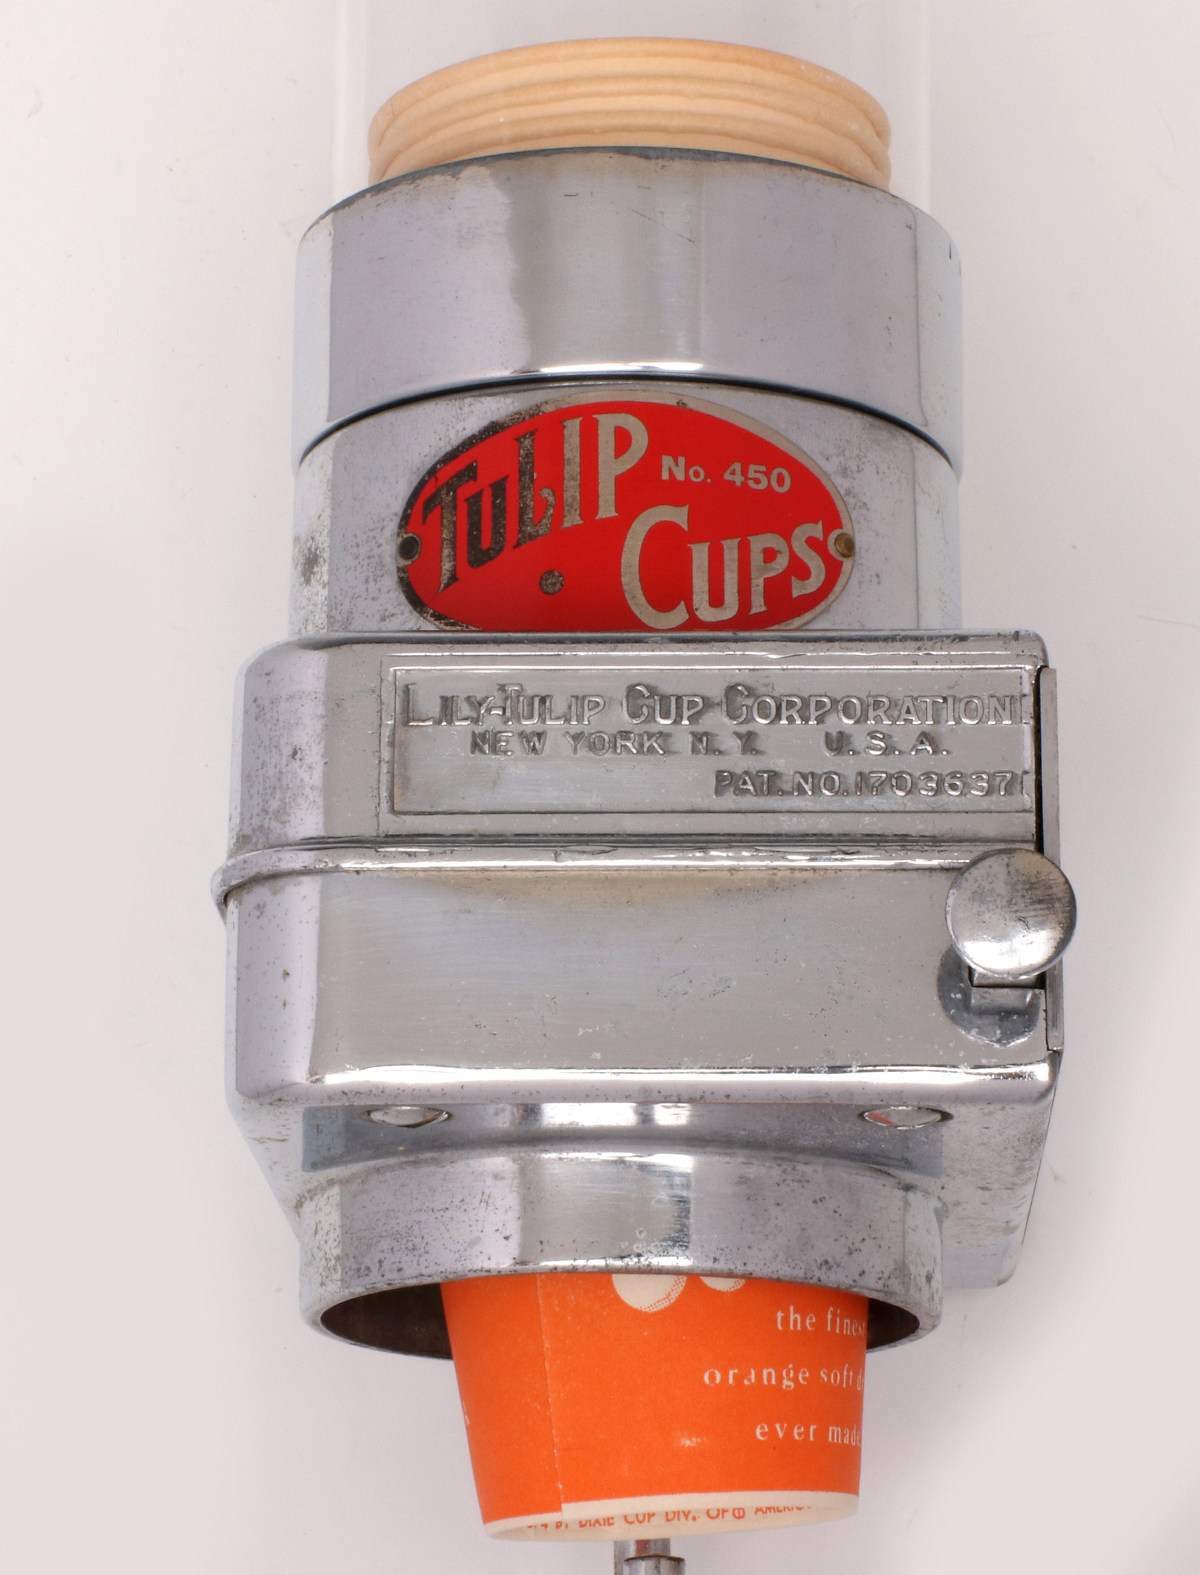 A TULIP CUPS WALL MOUNTED DISPENSER